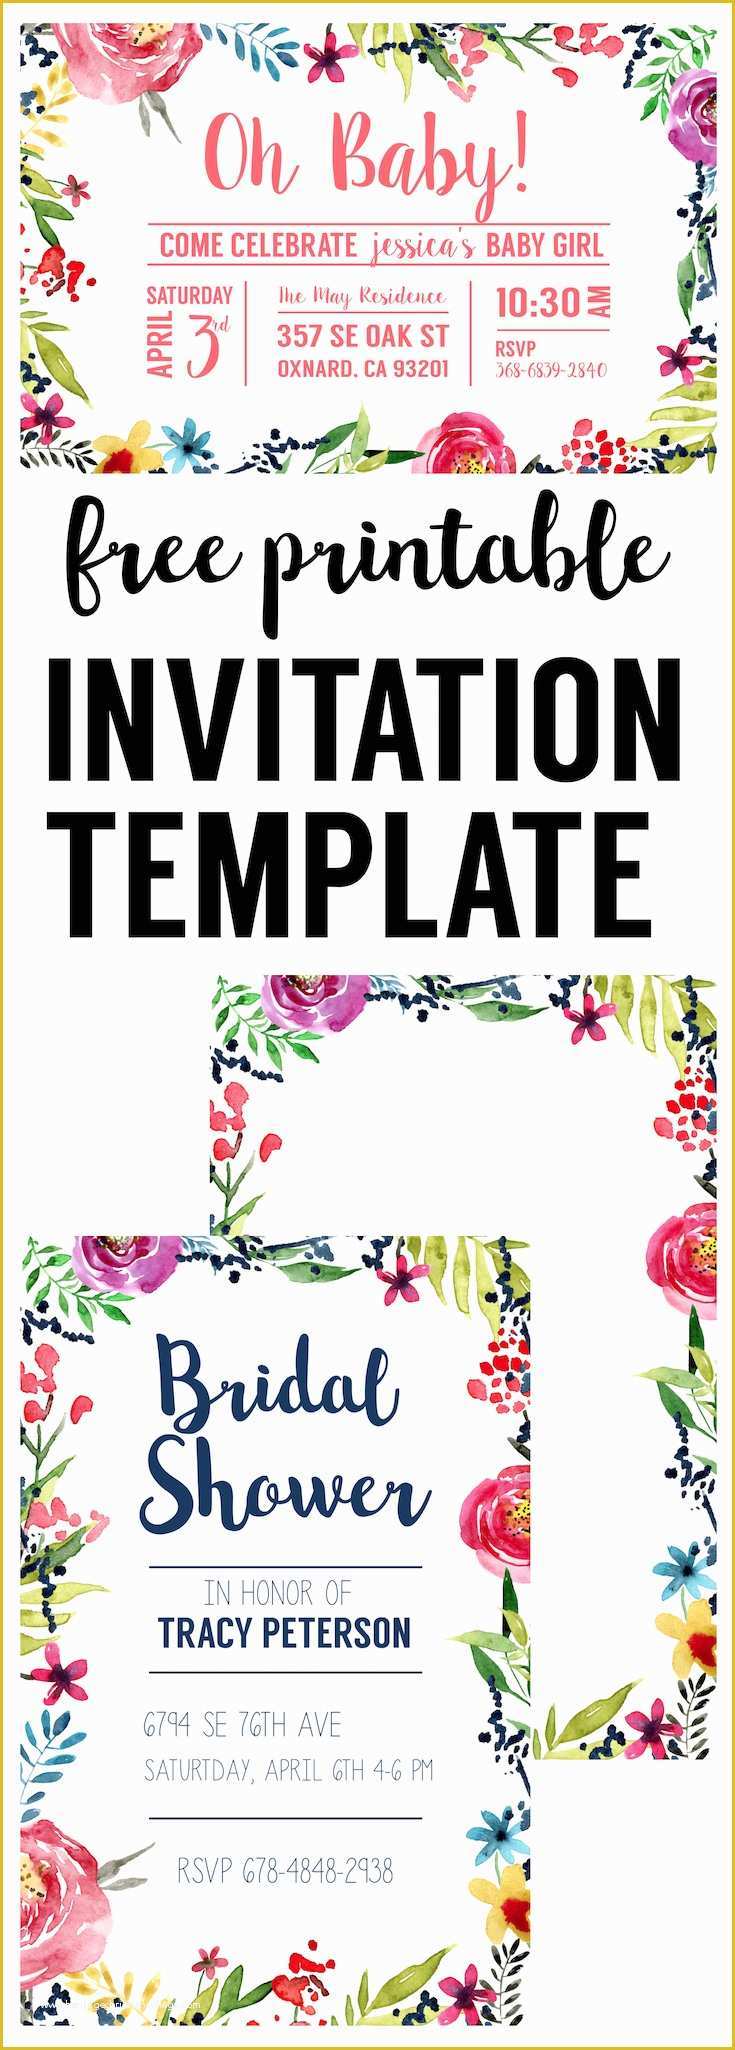 Free Invitation Templates Of Floral Borders Invitations Free Printable Invitation